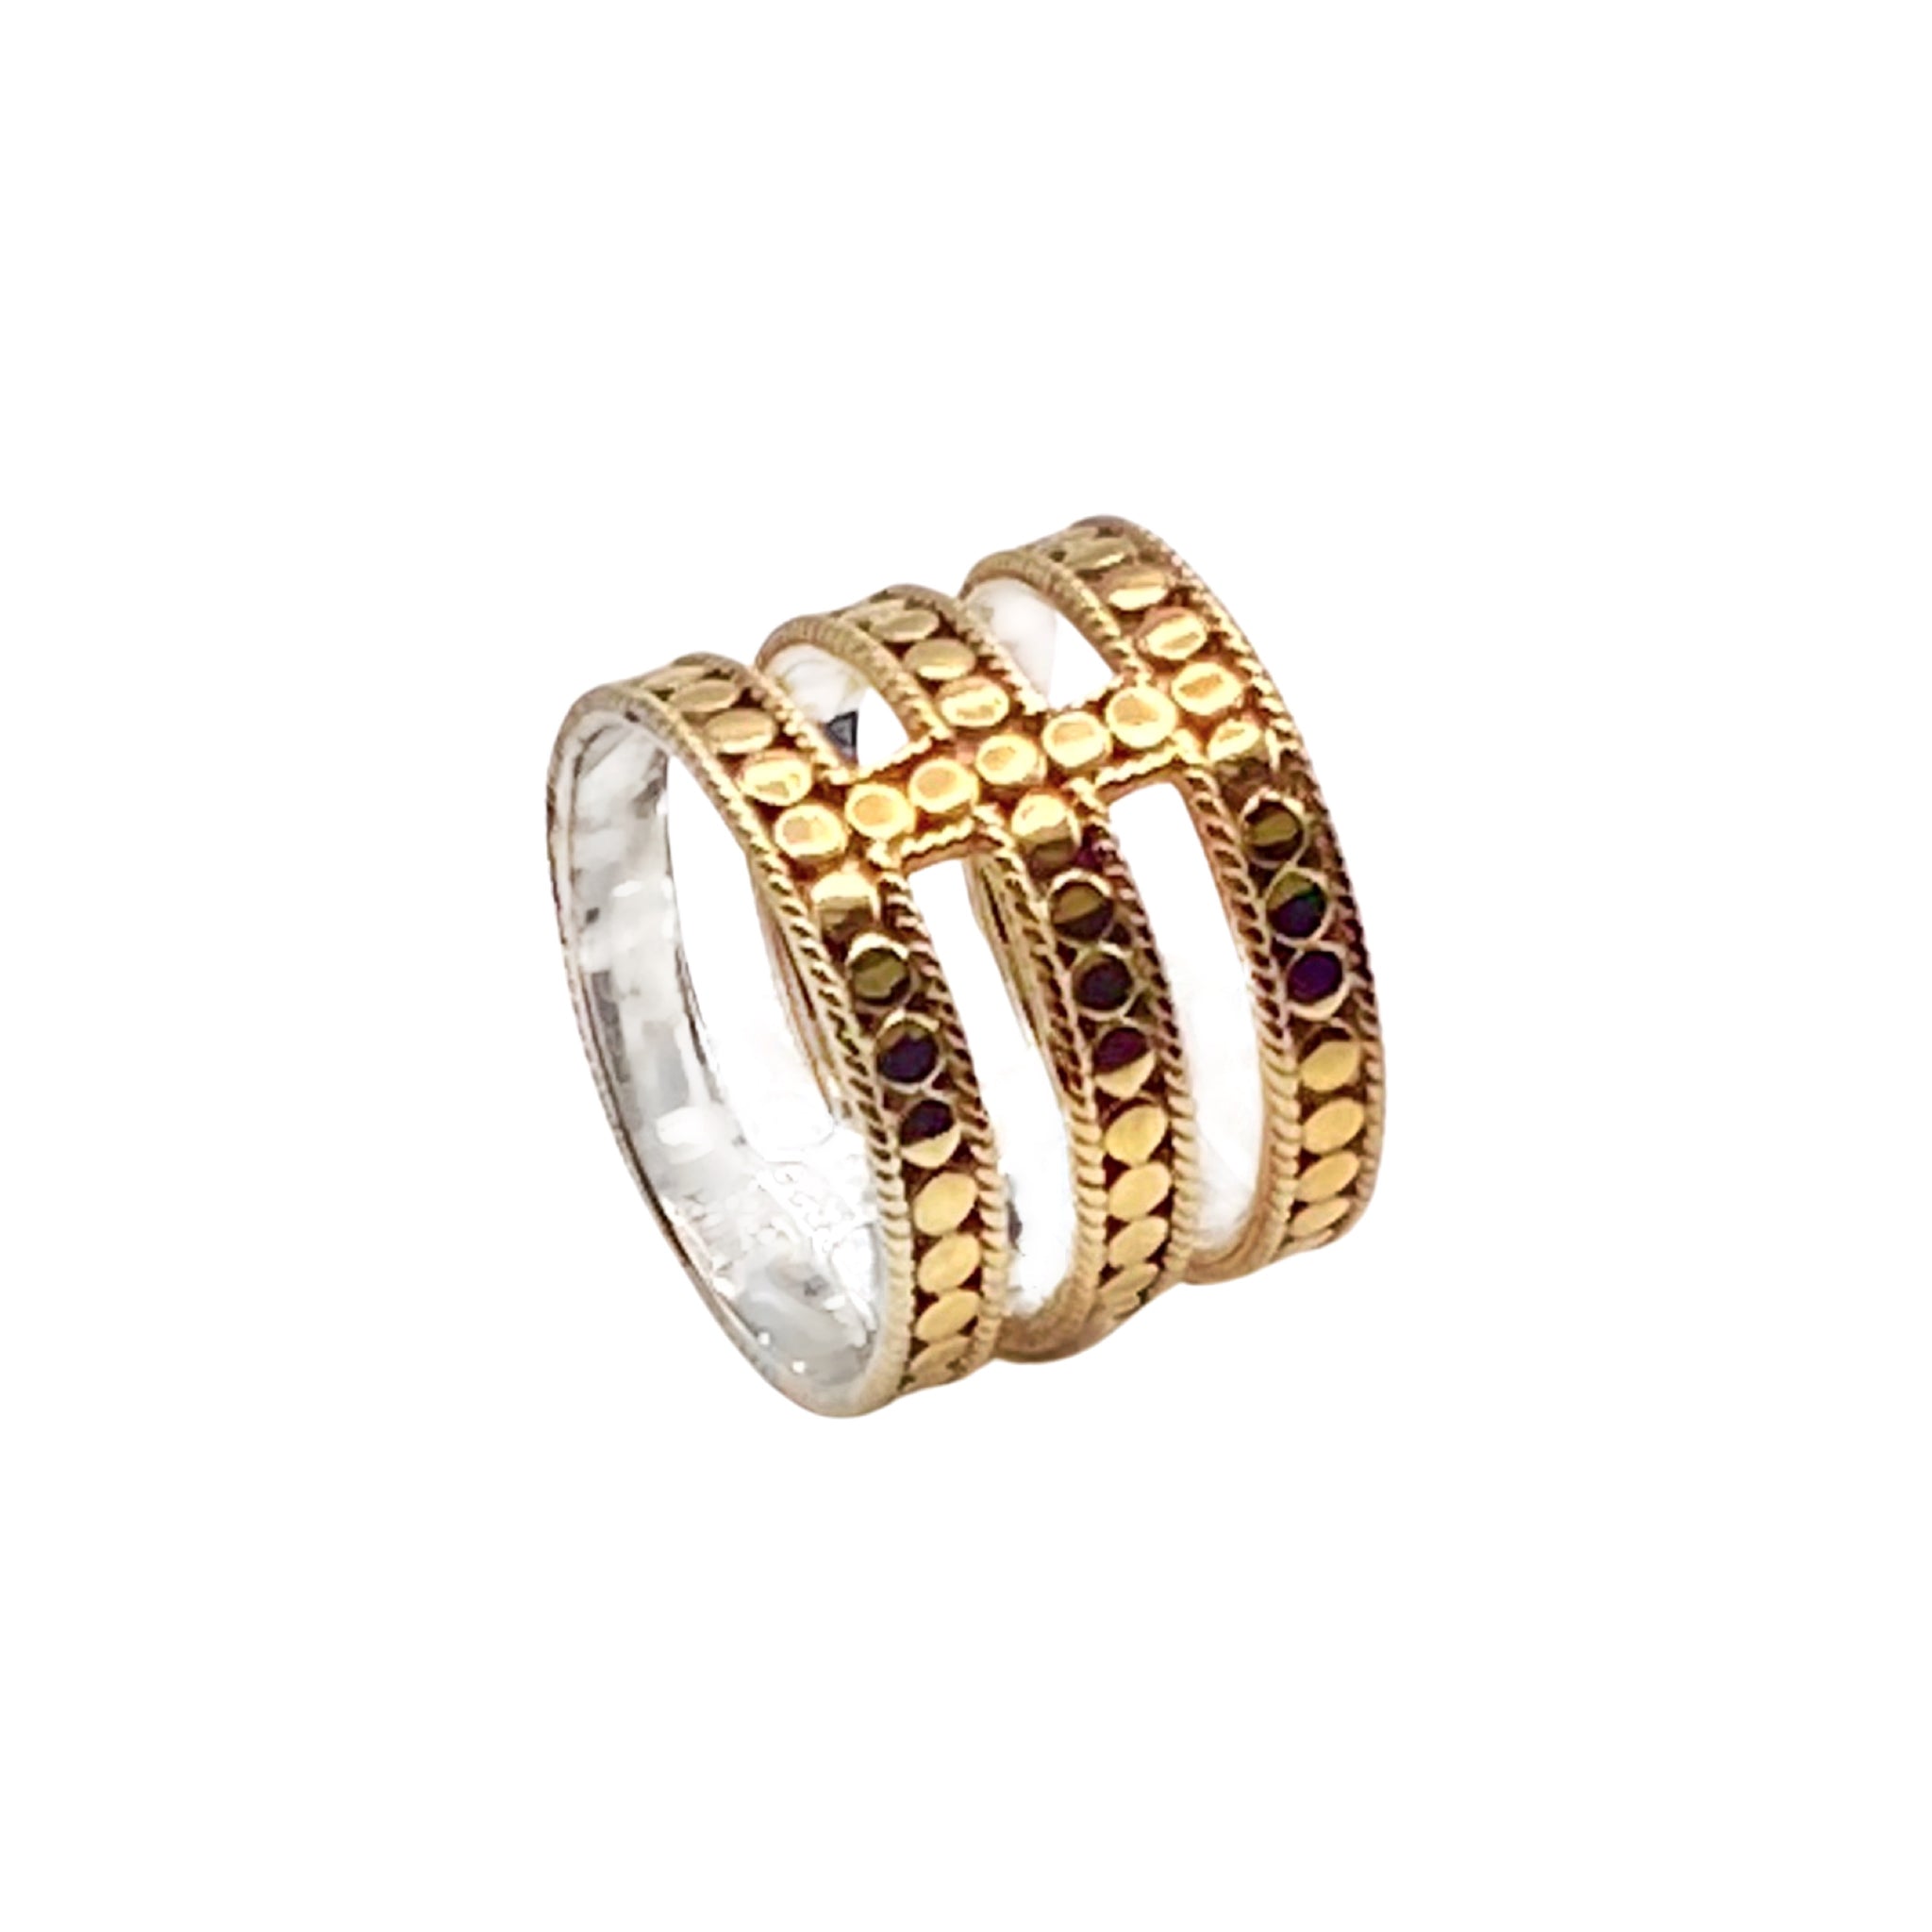 Anna Beck Triple Bar 18k vermeil ring available at Shaylula Jewlery & Gifts in Tarrytown, NY and online.